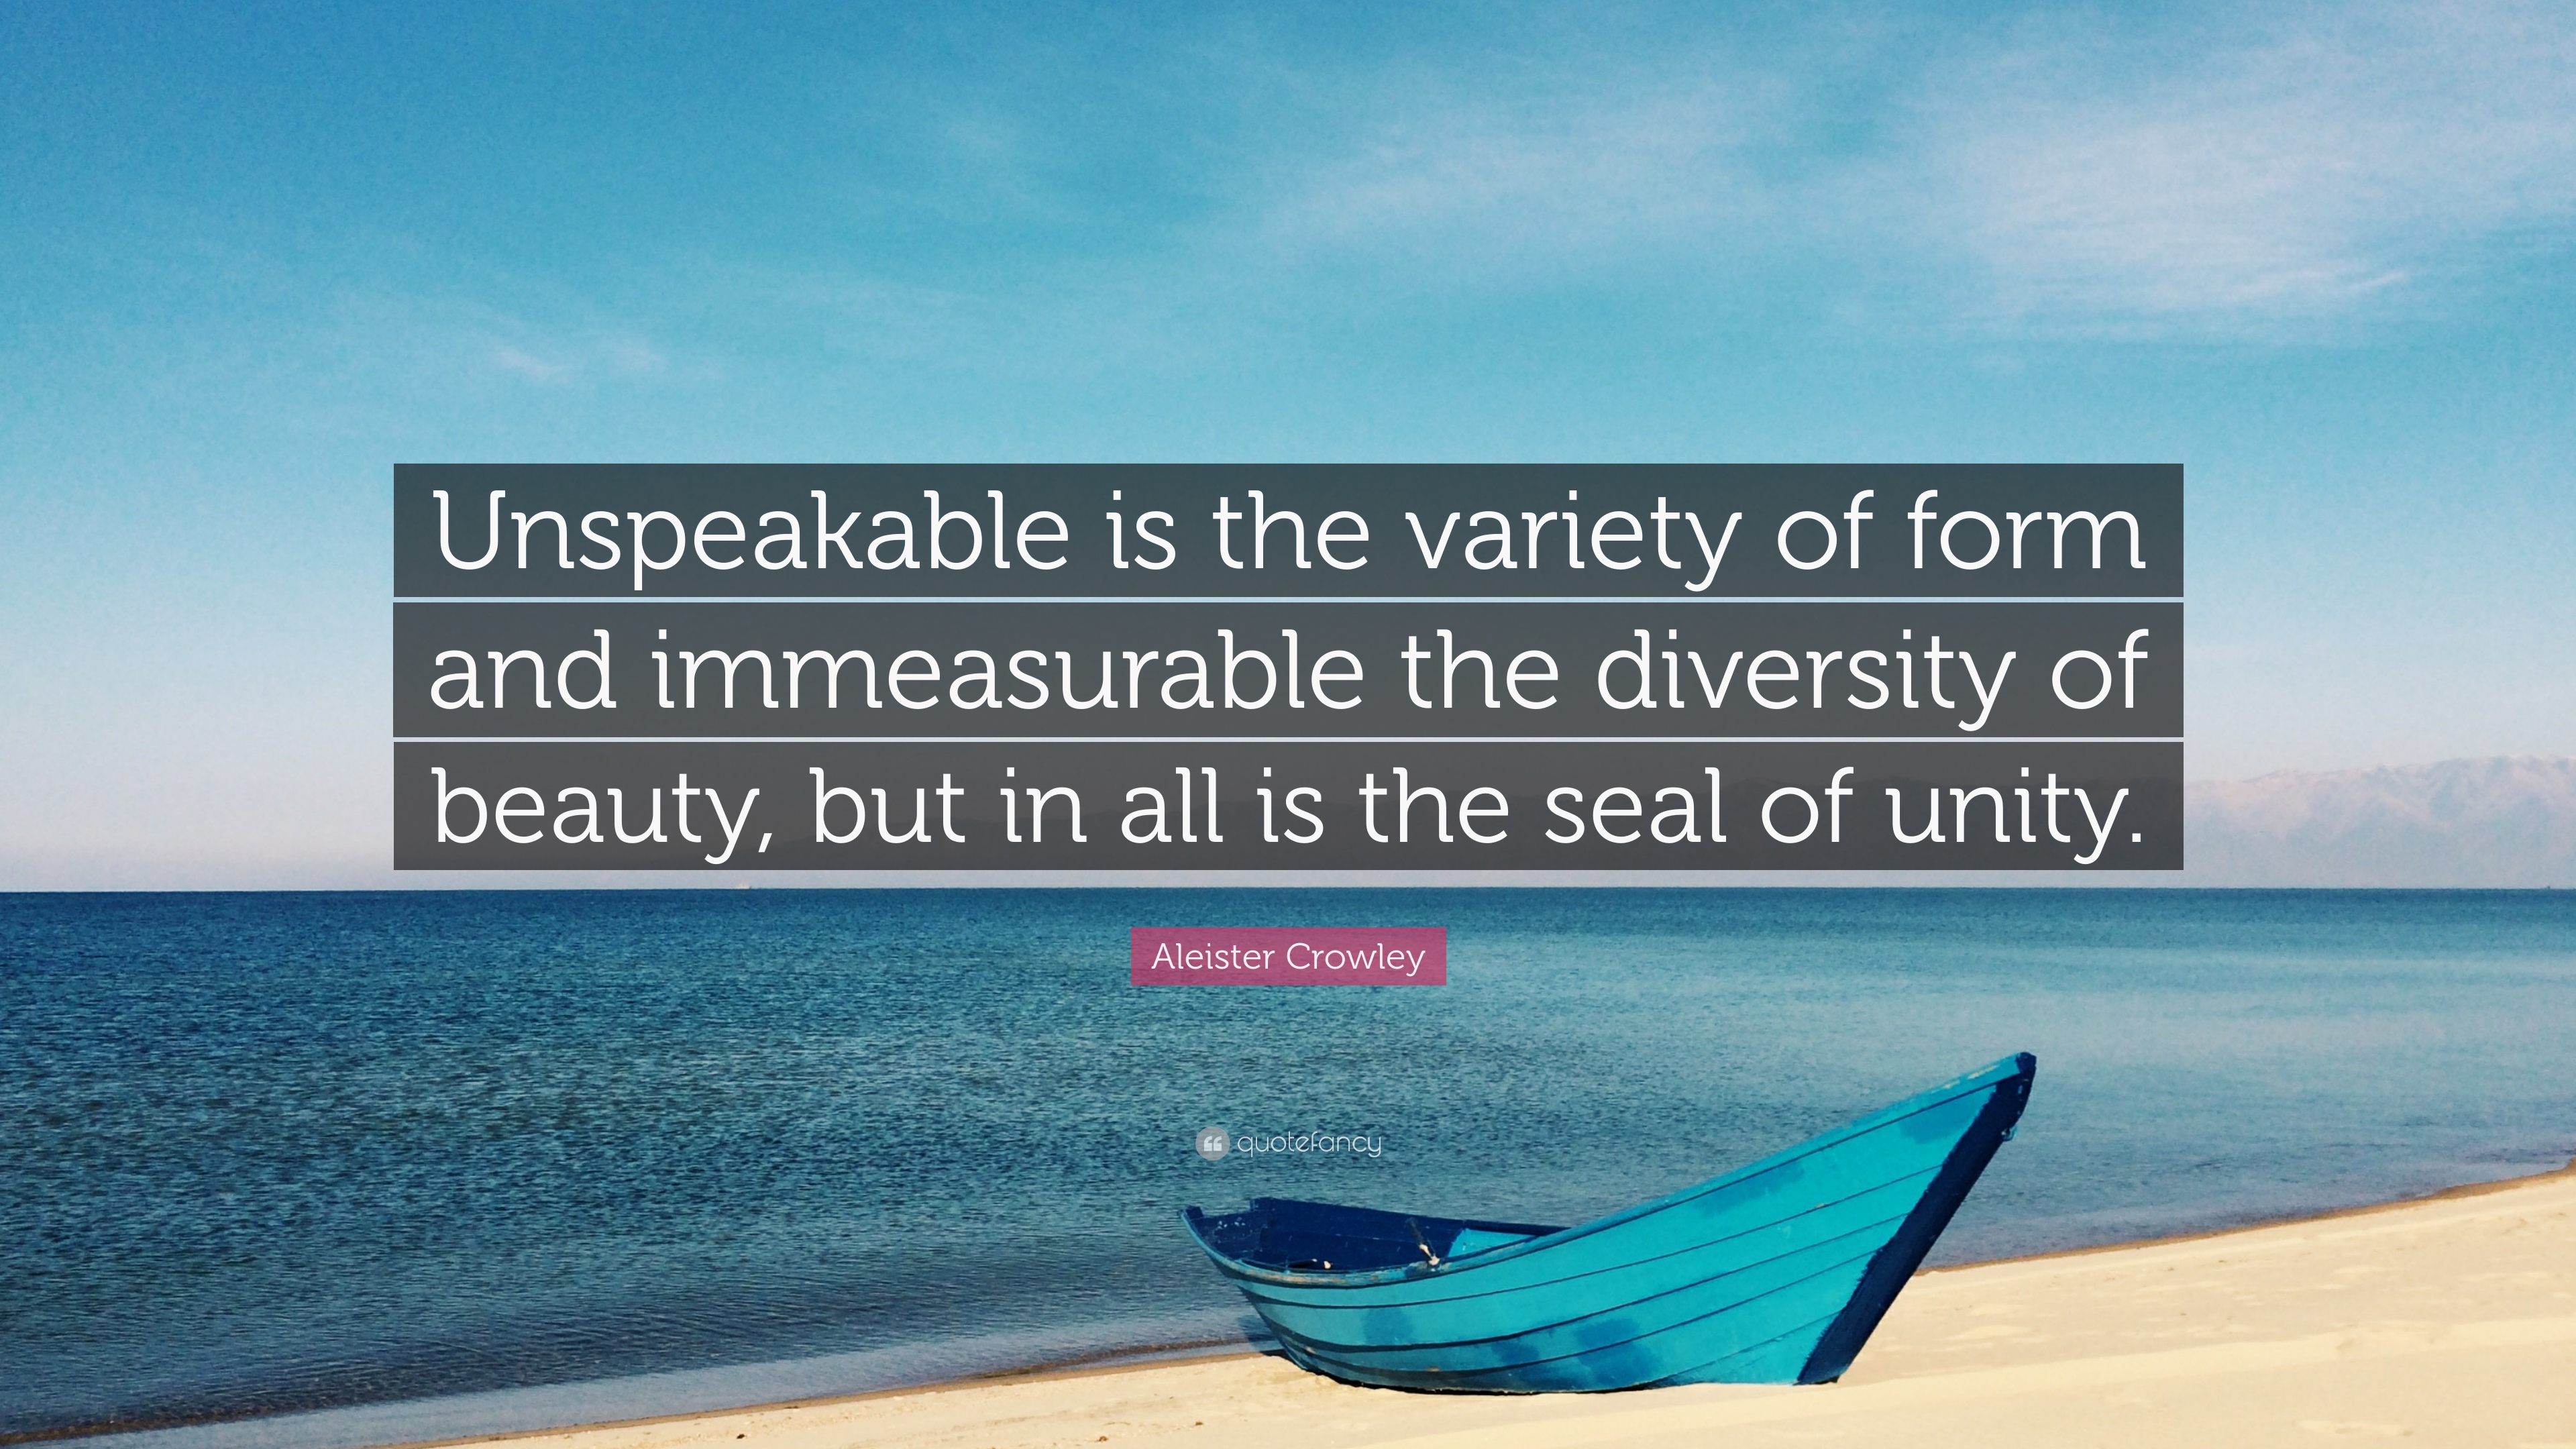 Aleister Crowley Quote: “Unspeakable is the variety of form